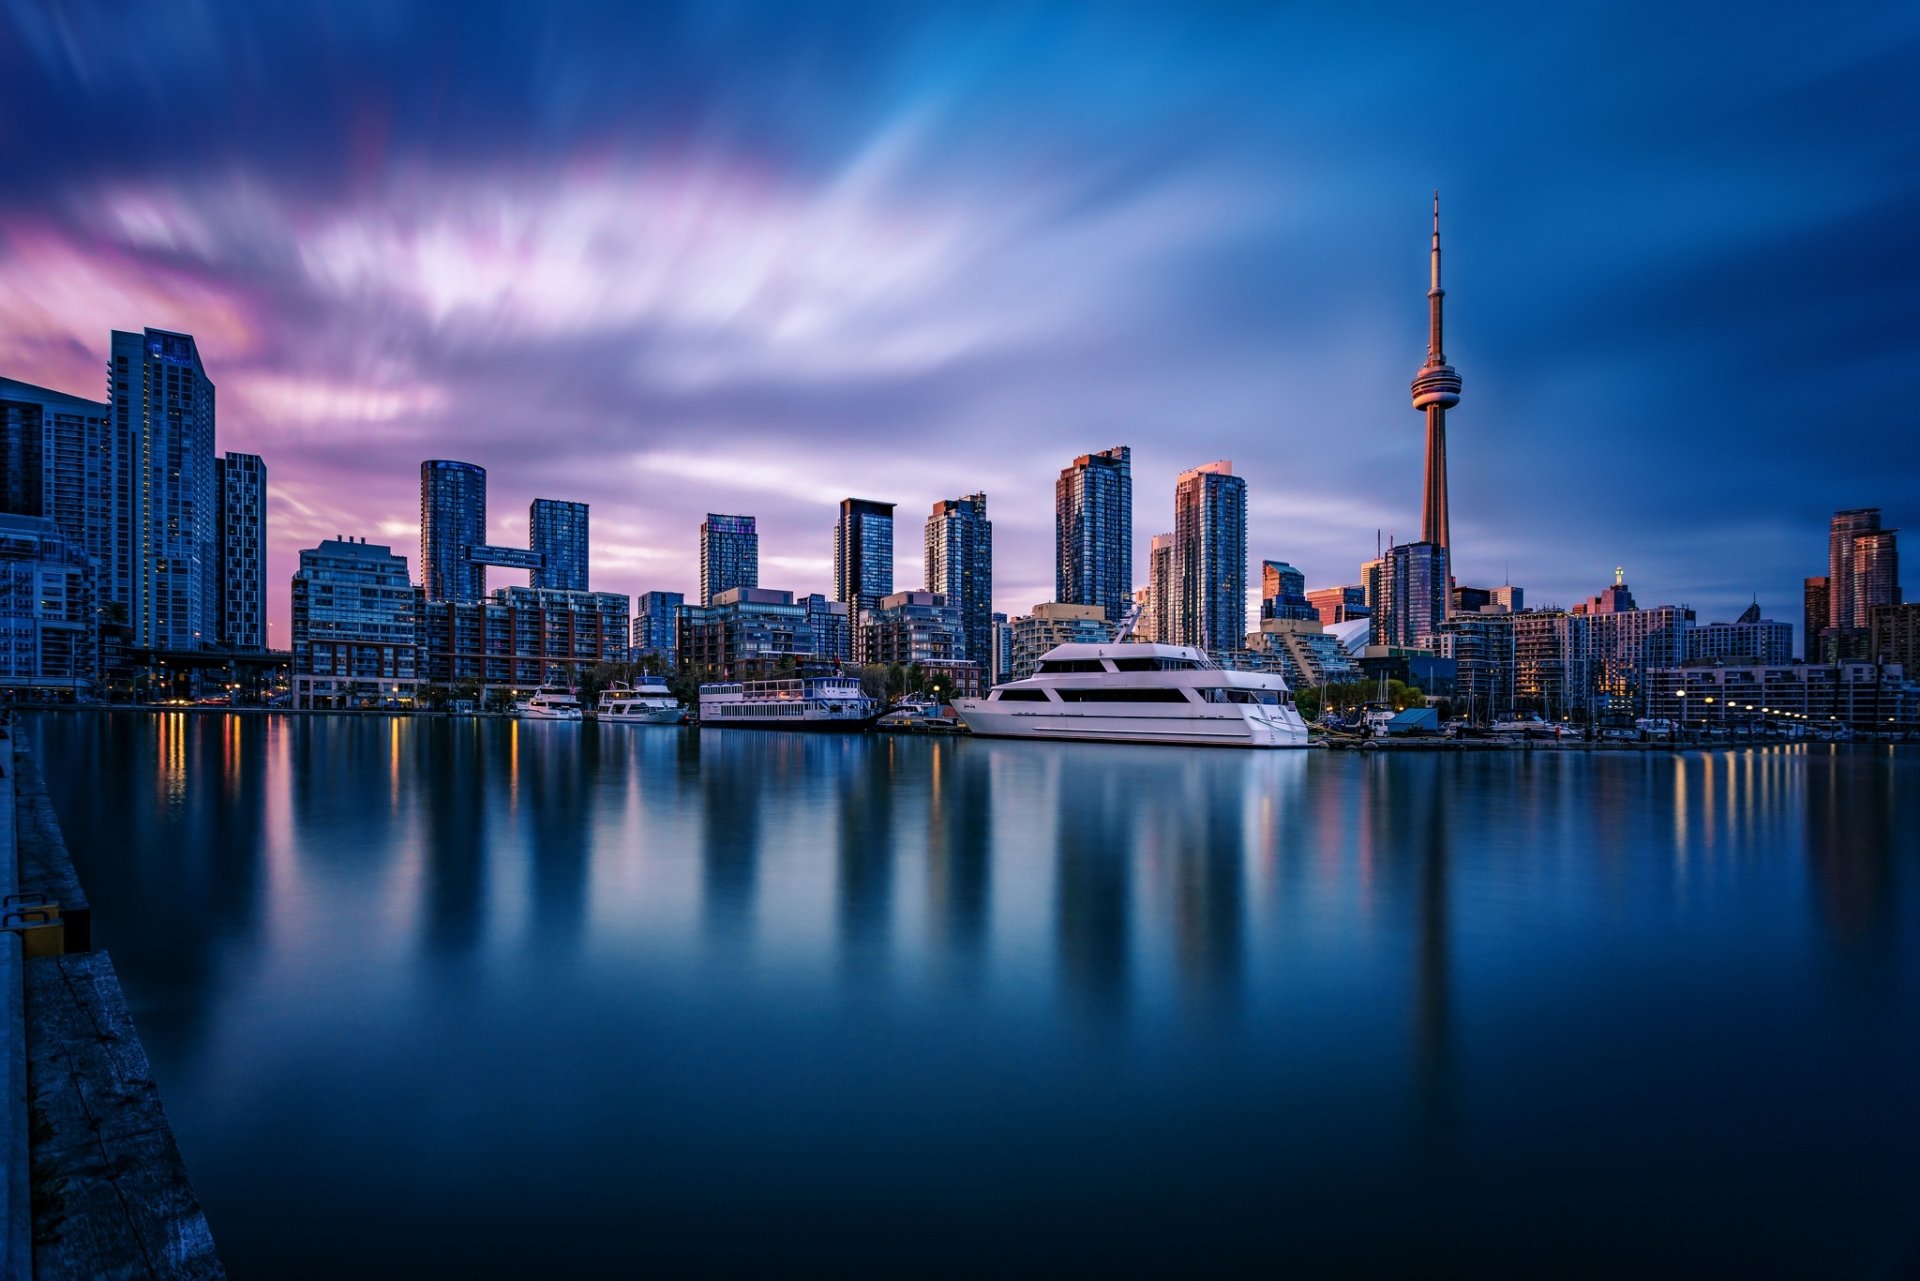 A mesmerizing cityscape of Toronto's stunning harbor with skyscrapers and iconic buildings, captured in high definition for a vivid desktop wallpaper.